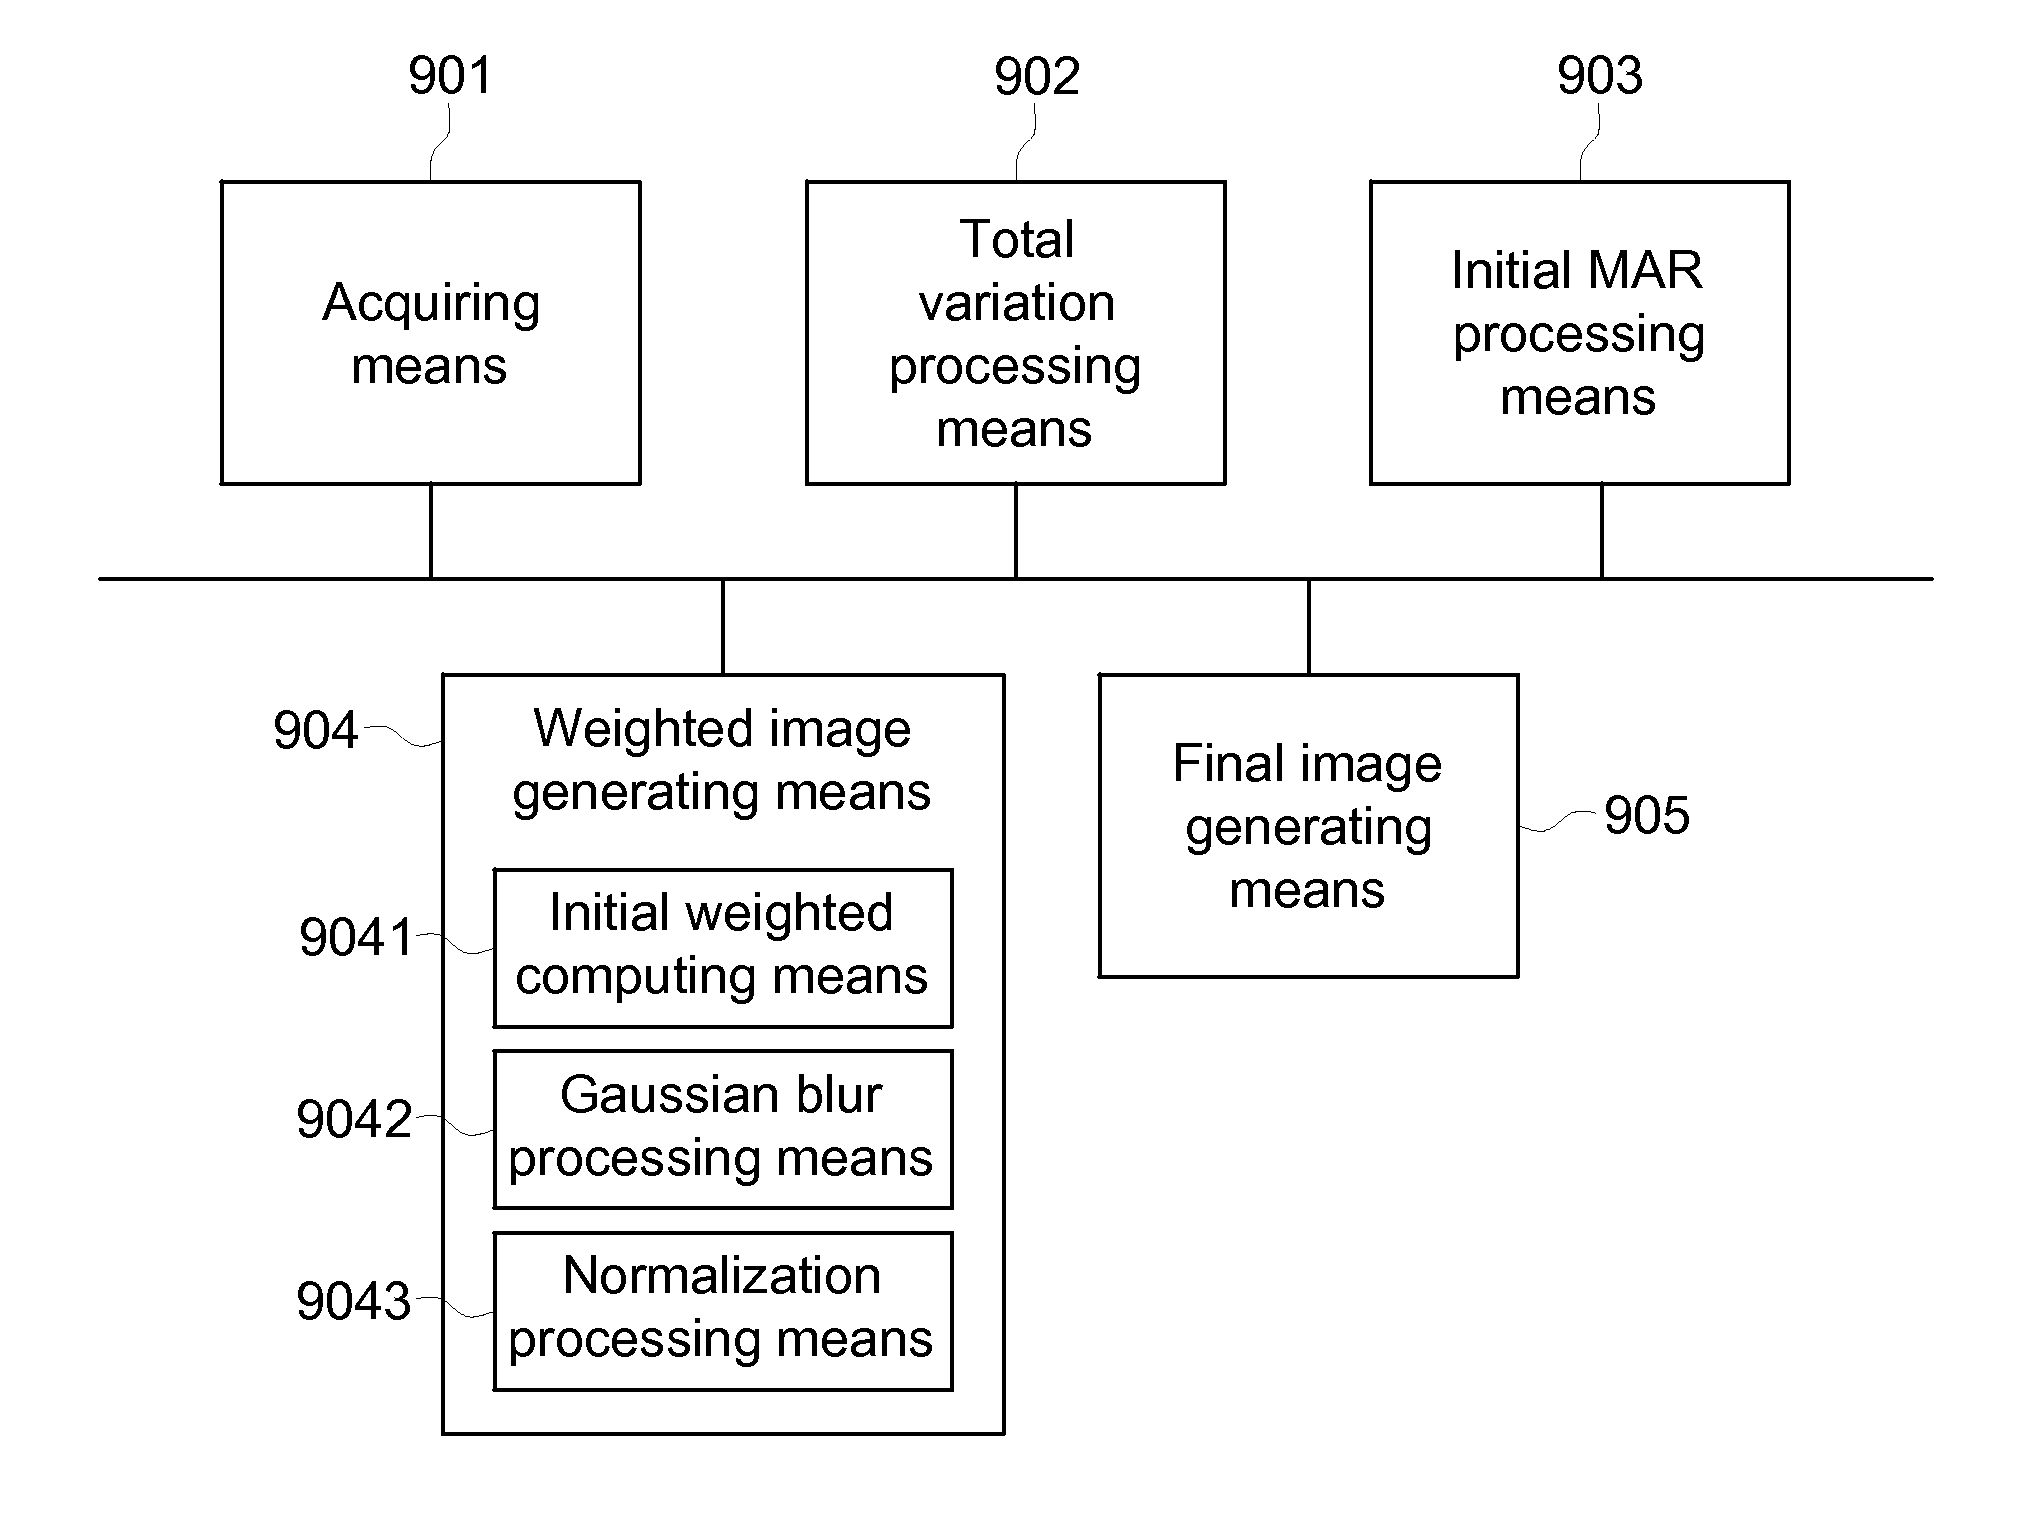 Method and apparatus for reducing artifacts in computed tomography (CT) image reconstruction